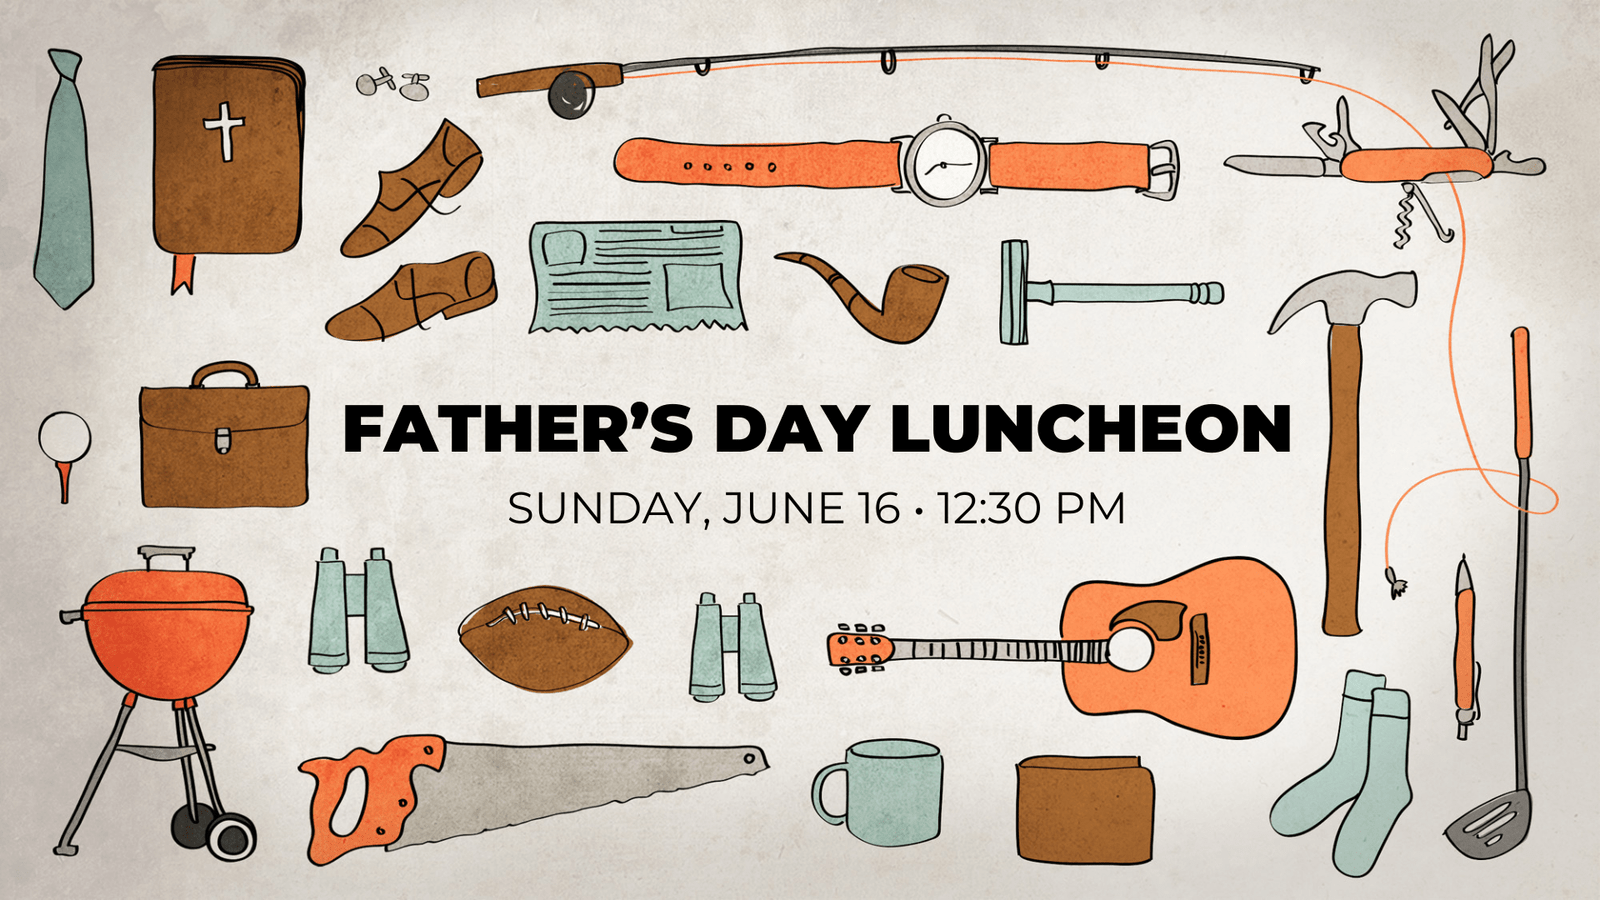 Father's Day Luncheon, Sunday, June 16, 12:30 p.m.